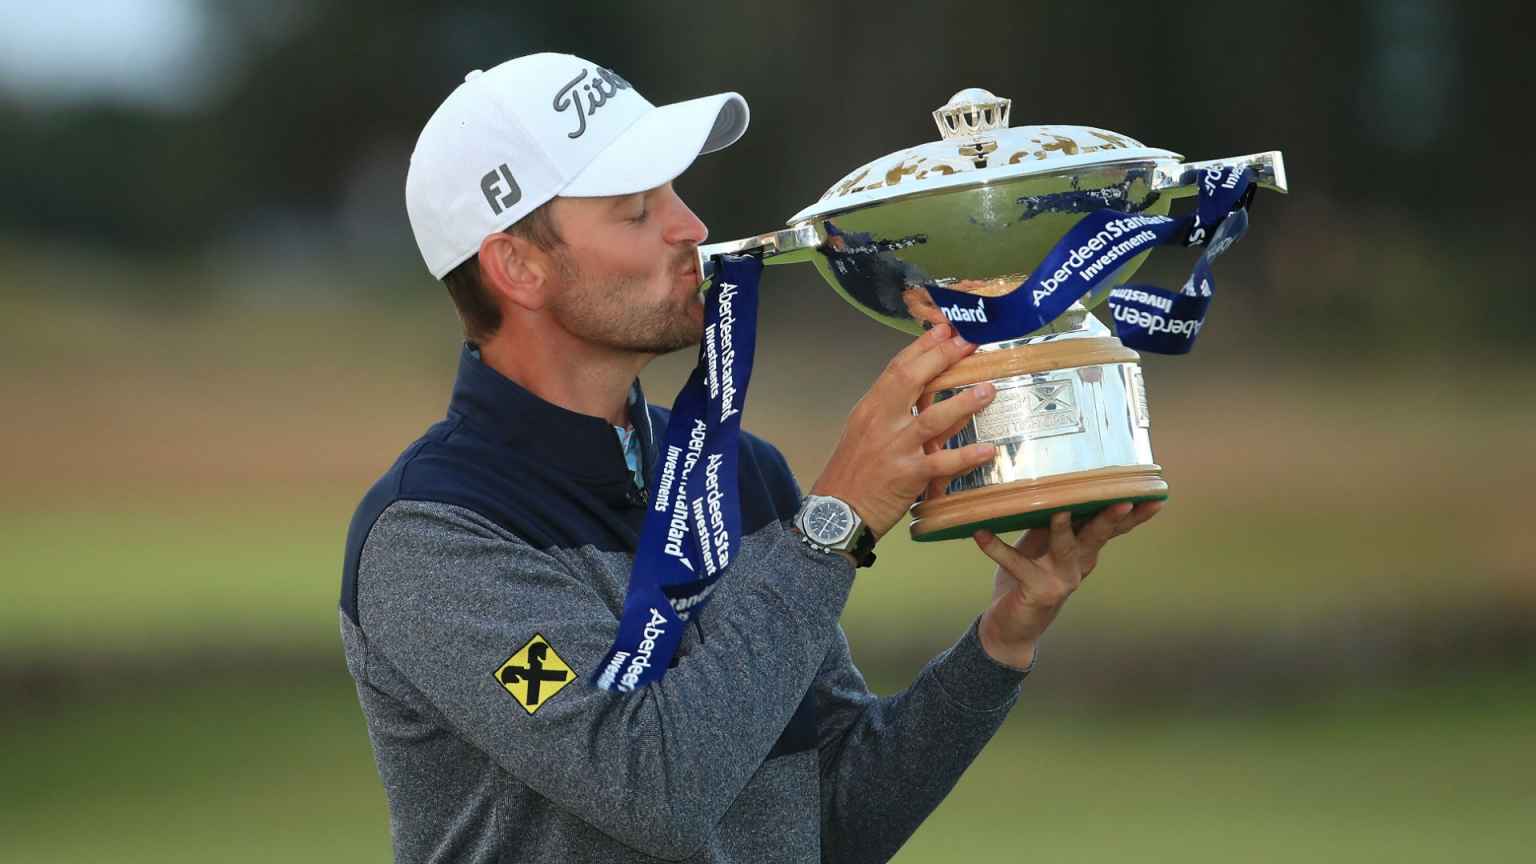 Bernd Wiesberger What's in the bag of the Scottish Open winner